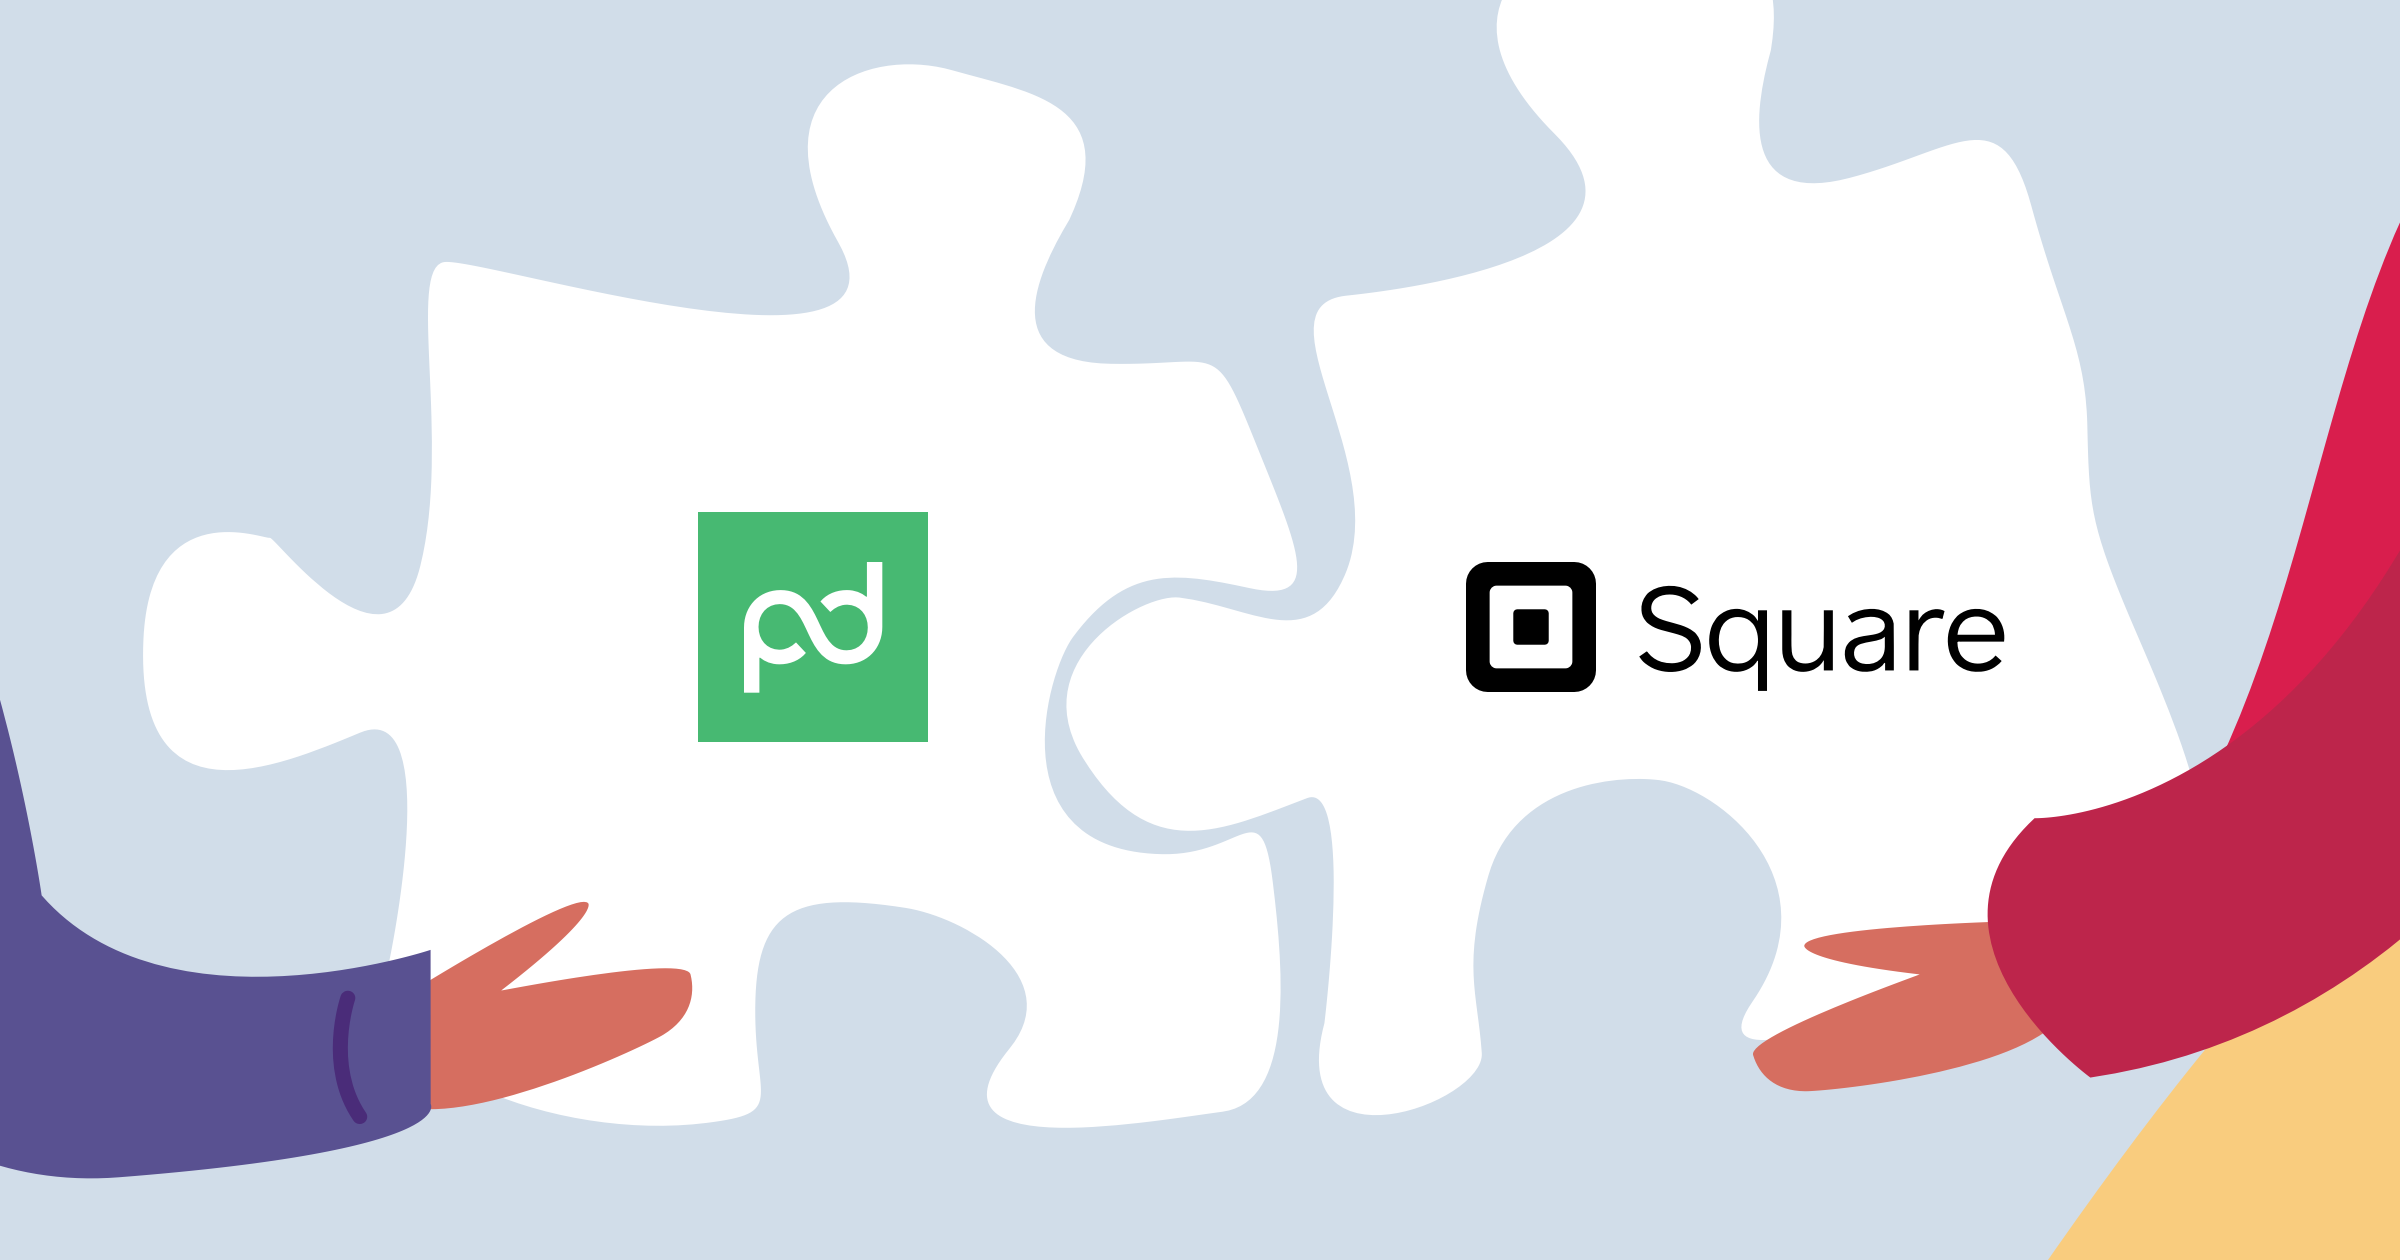 Accept payments quickly, easily, and securely with the new Square integration